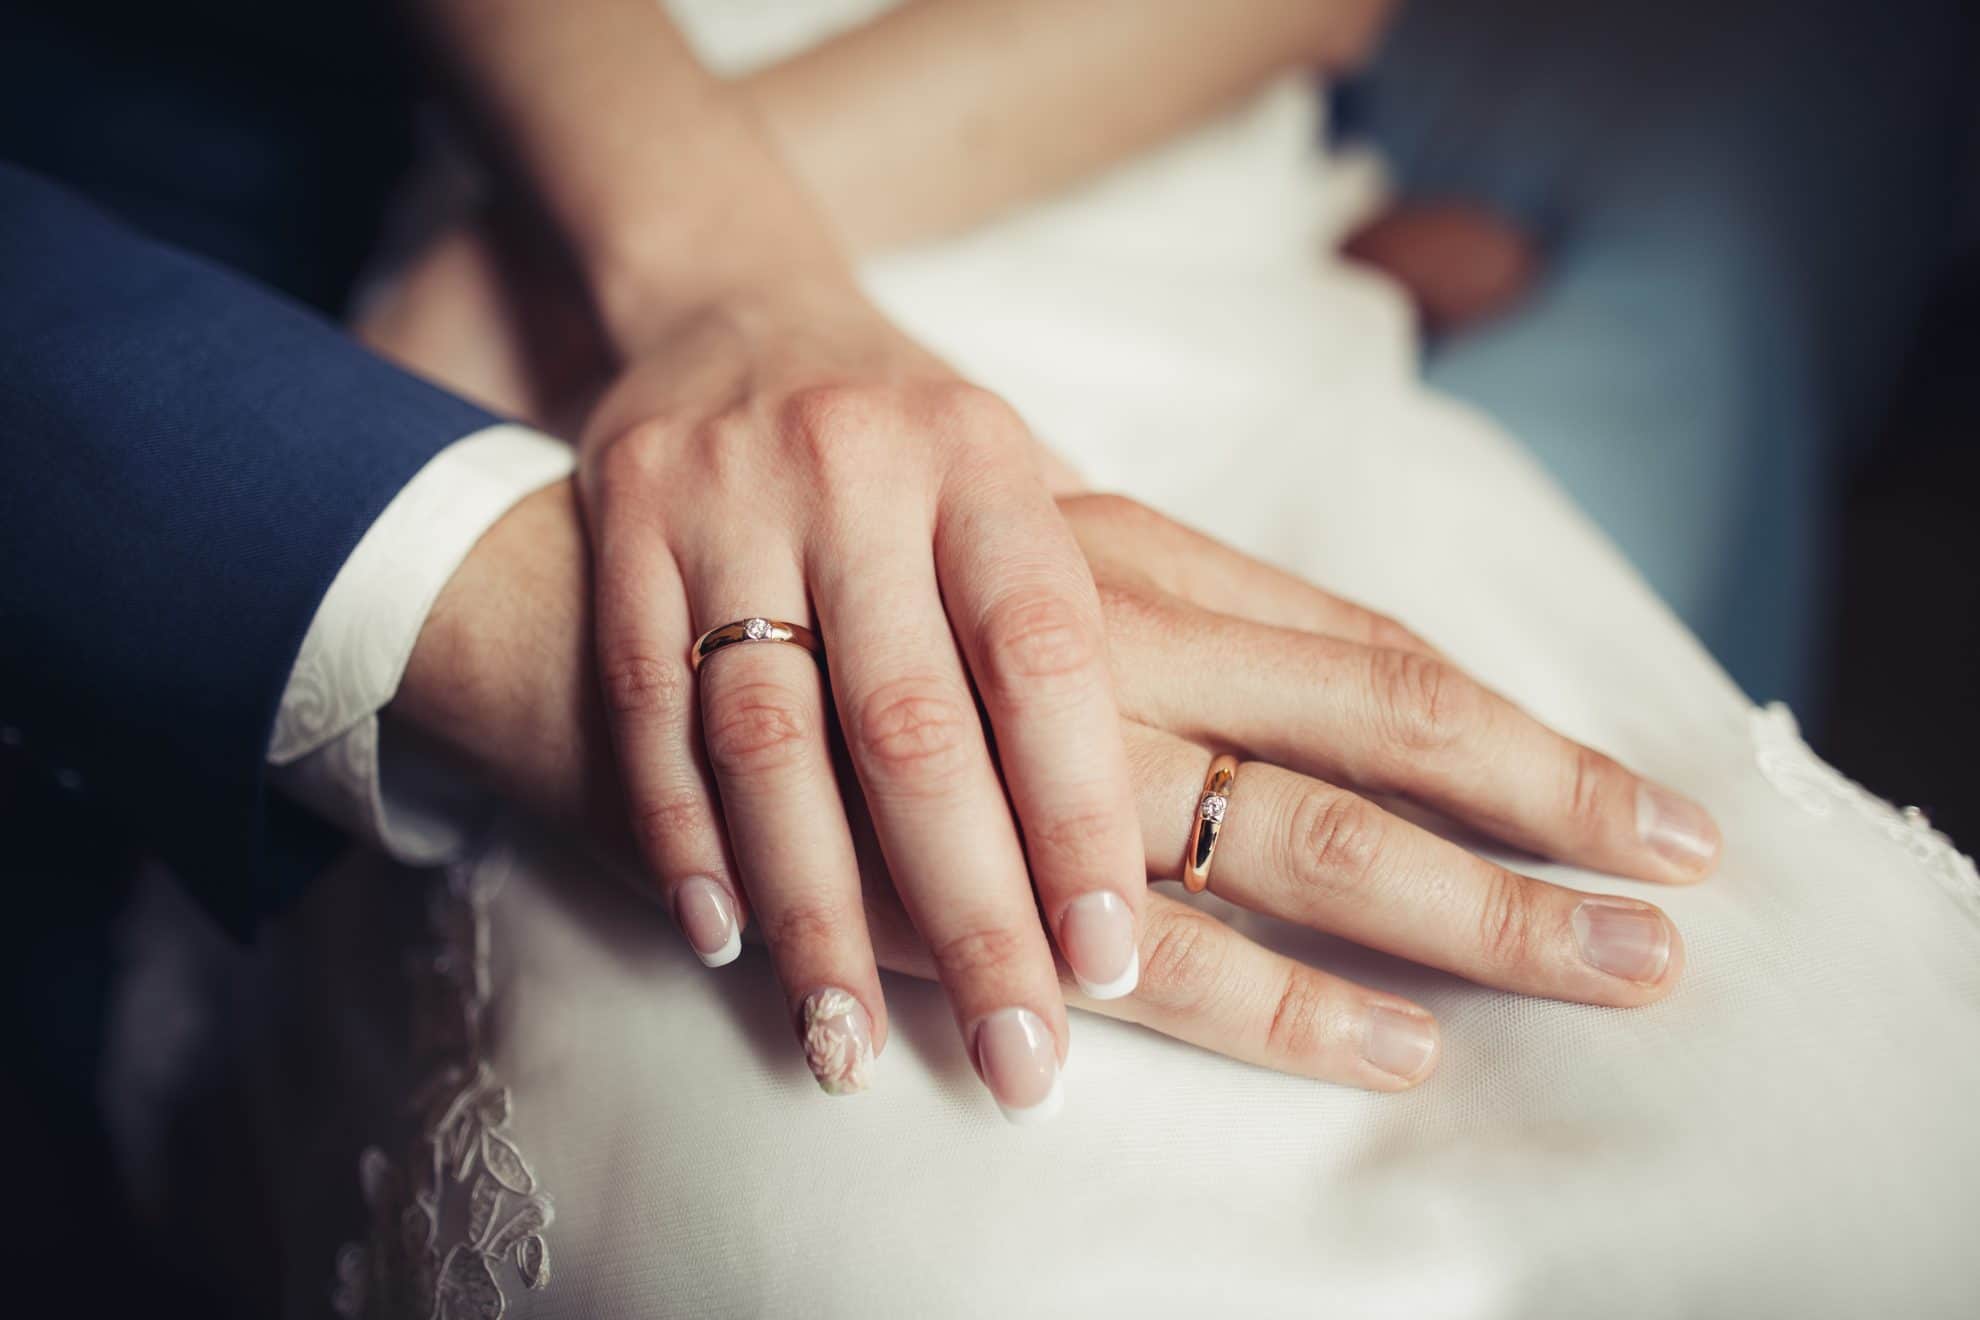 A bride places her hand on top of the groom's hand, displaying their wedding rings.